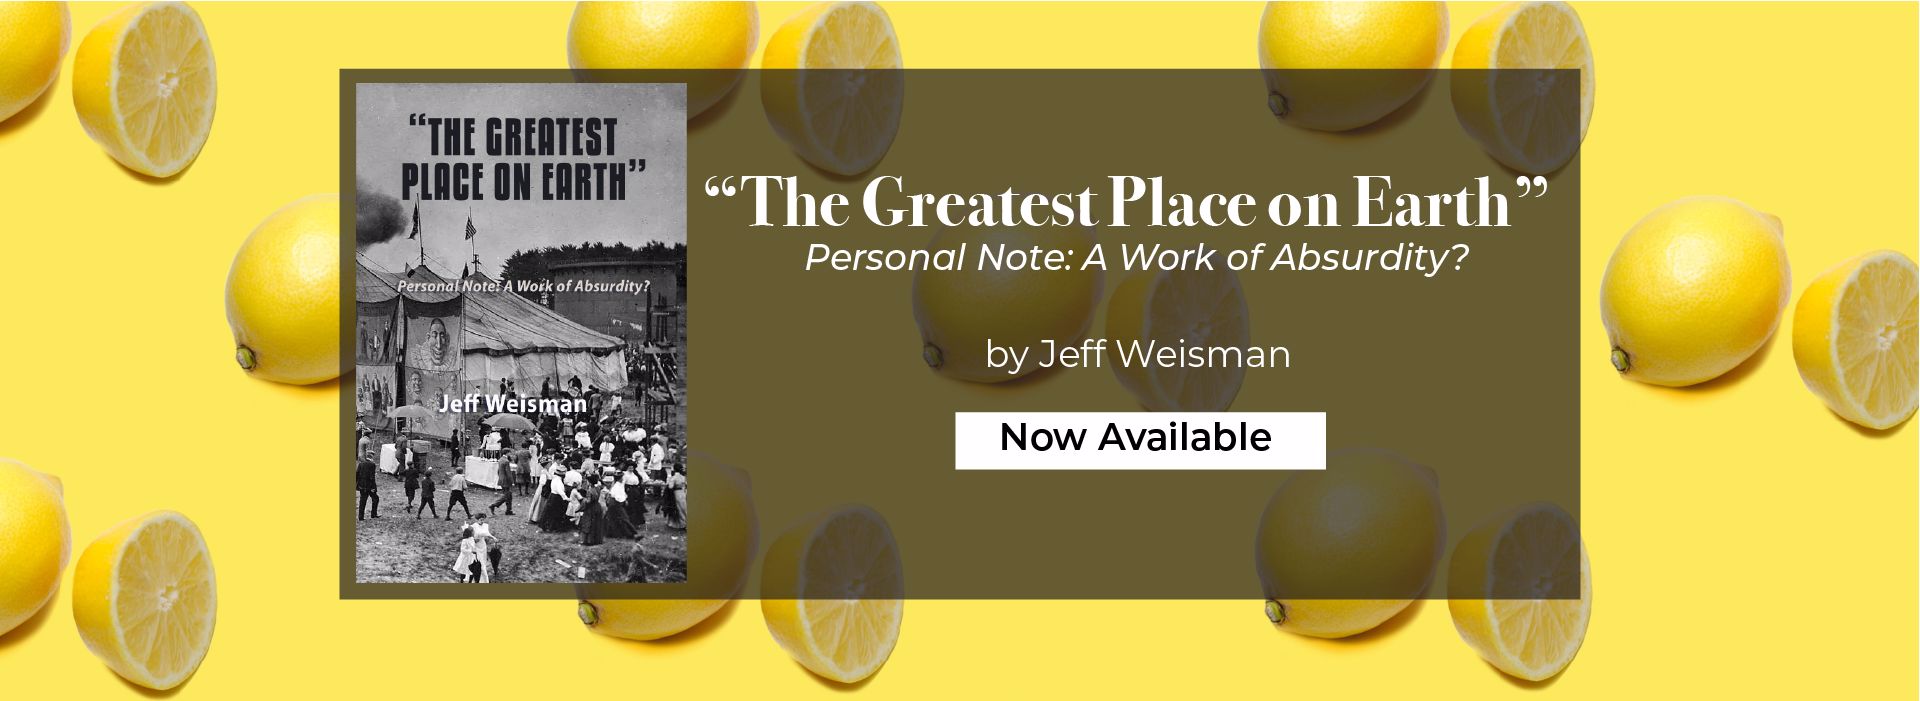 "The Greatest Place on Earth" Personal Note: A Work of Absurdity by Jeff Weisman